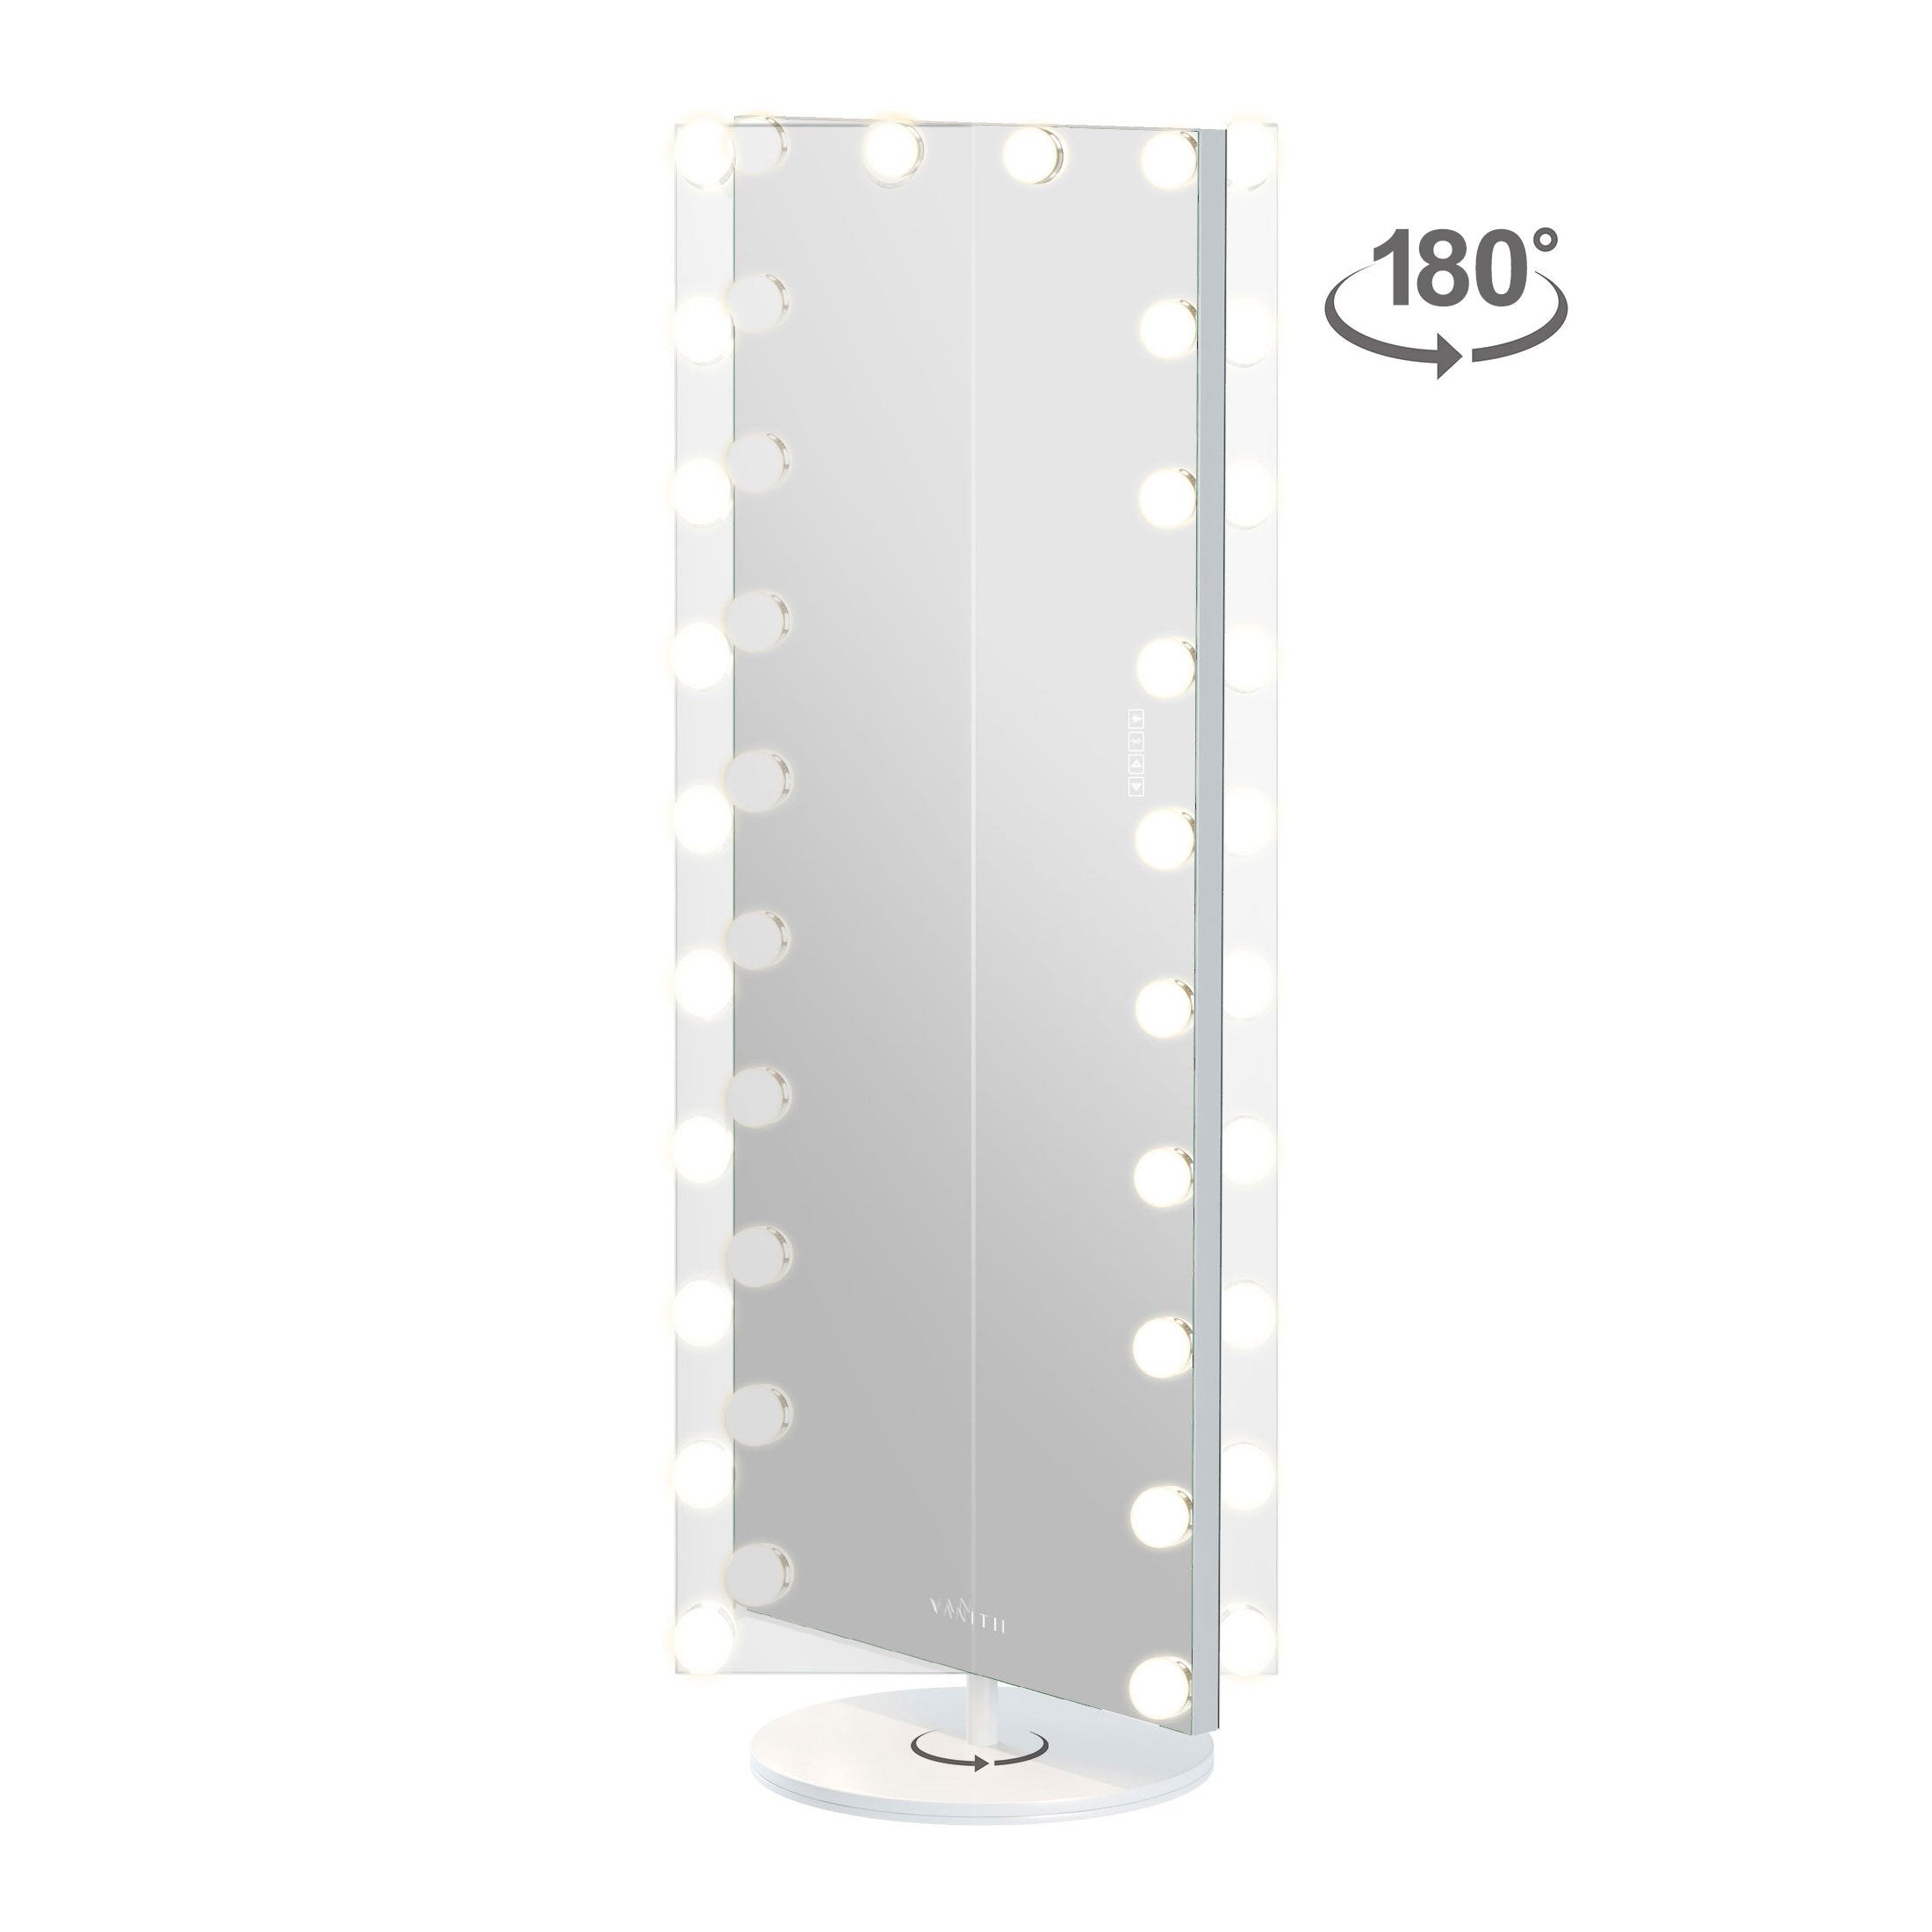 Svdor Hollywood Vanity Mirror - Full Length Vanity Mirror with Swivel 180º Rotation Stand_VANITII